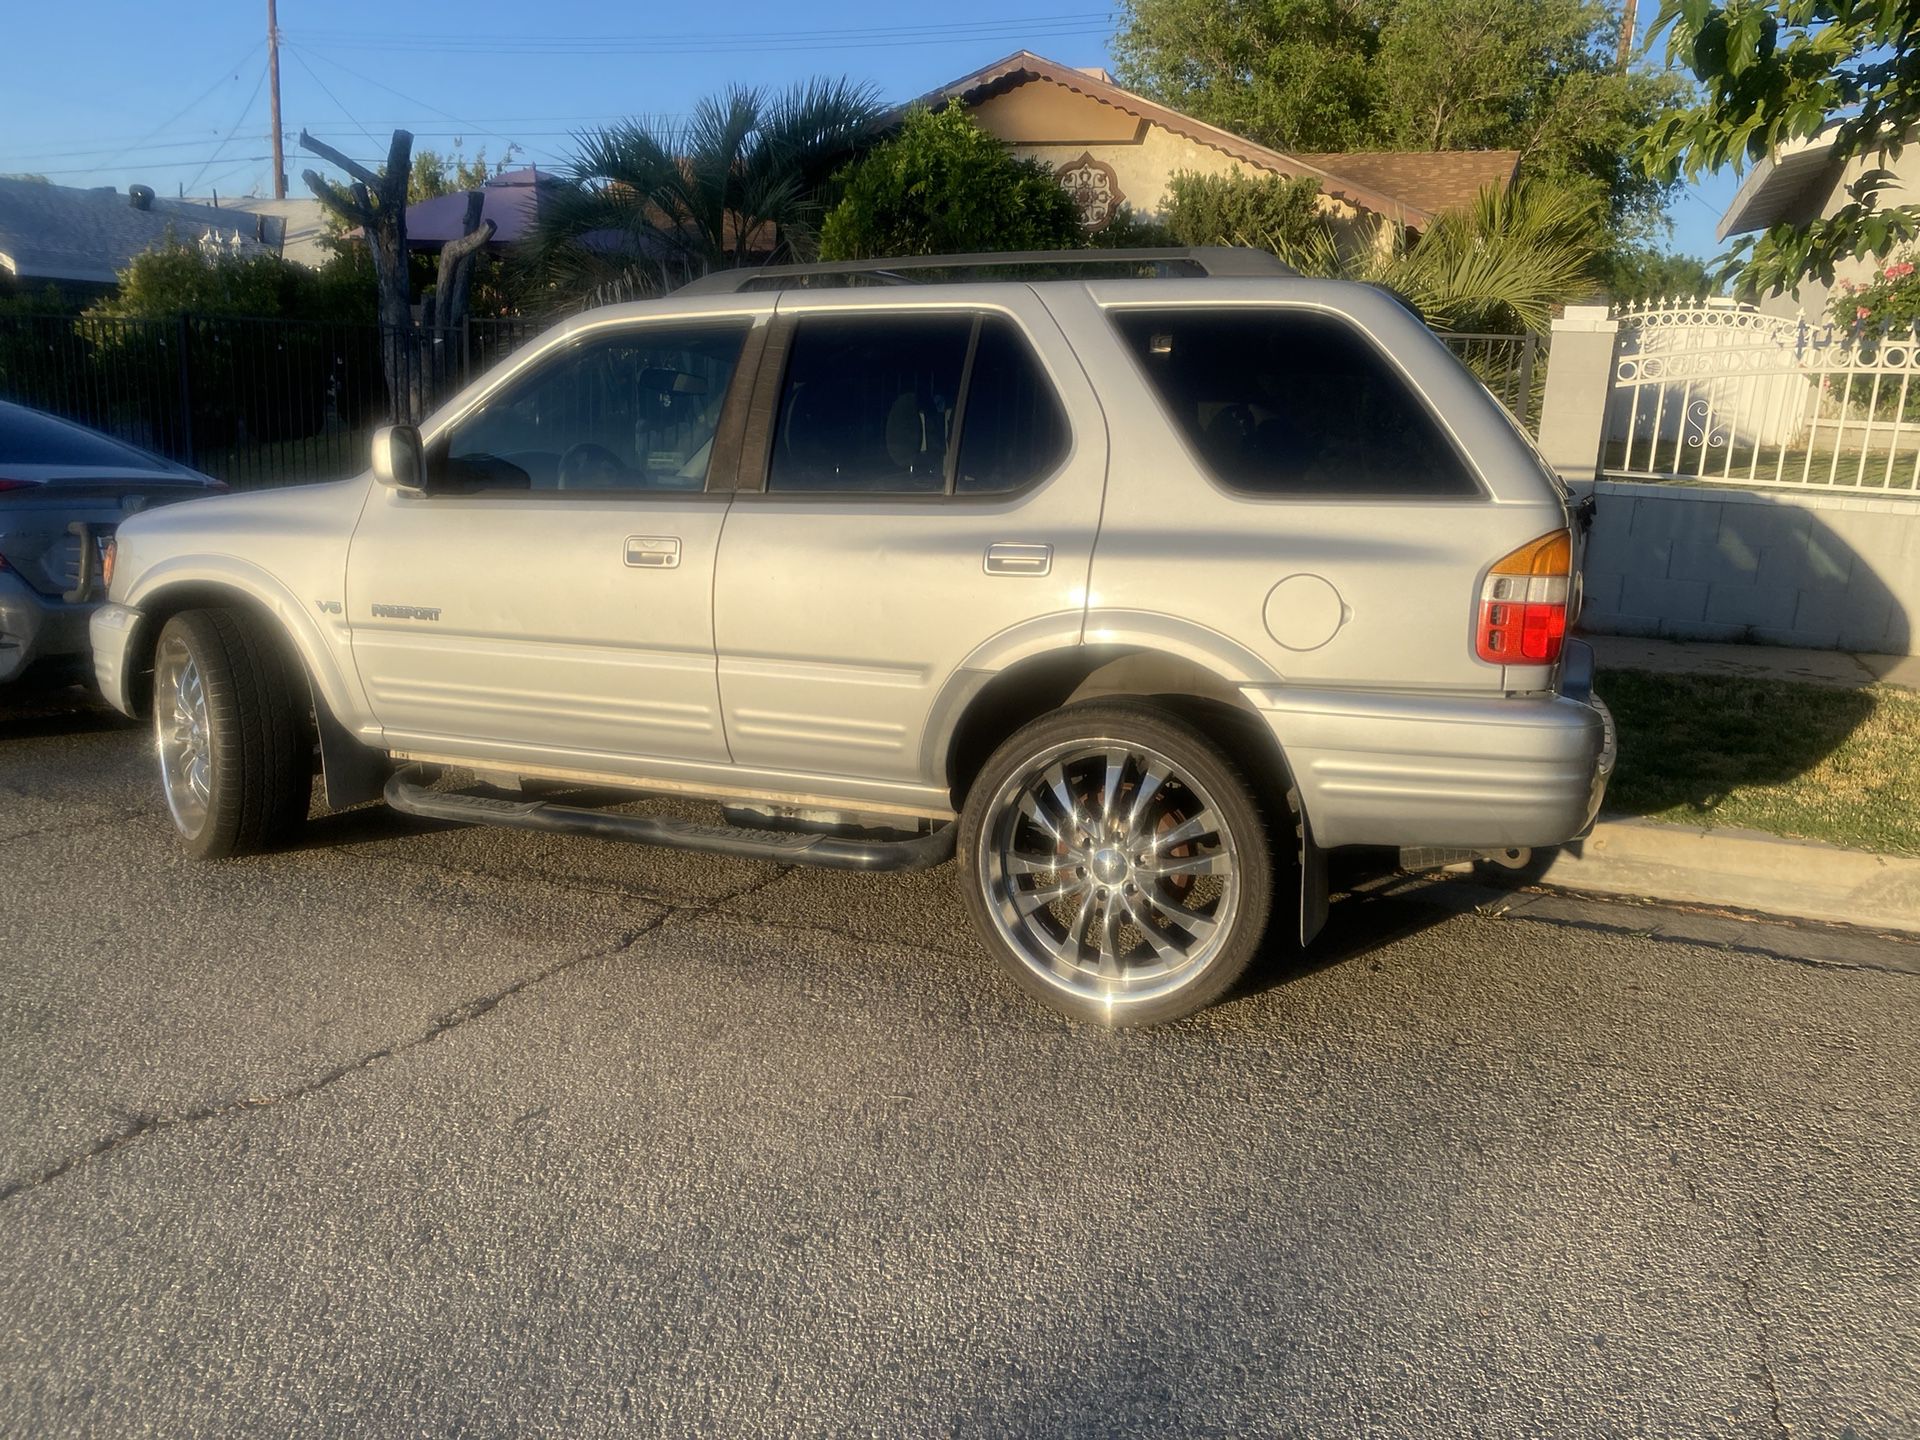 Honda Passport One Owner  122093 Miles I Use The Passport Every Day 